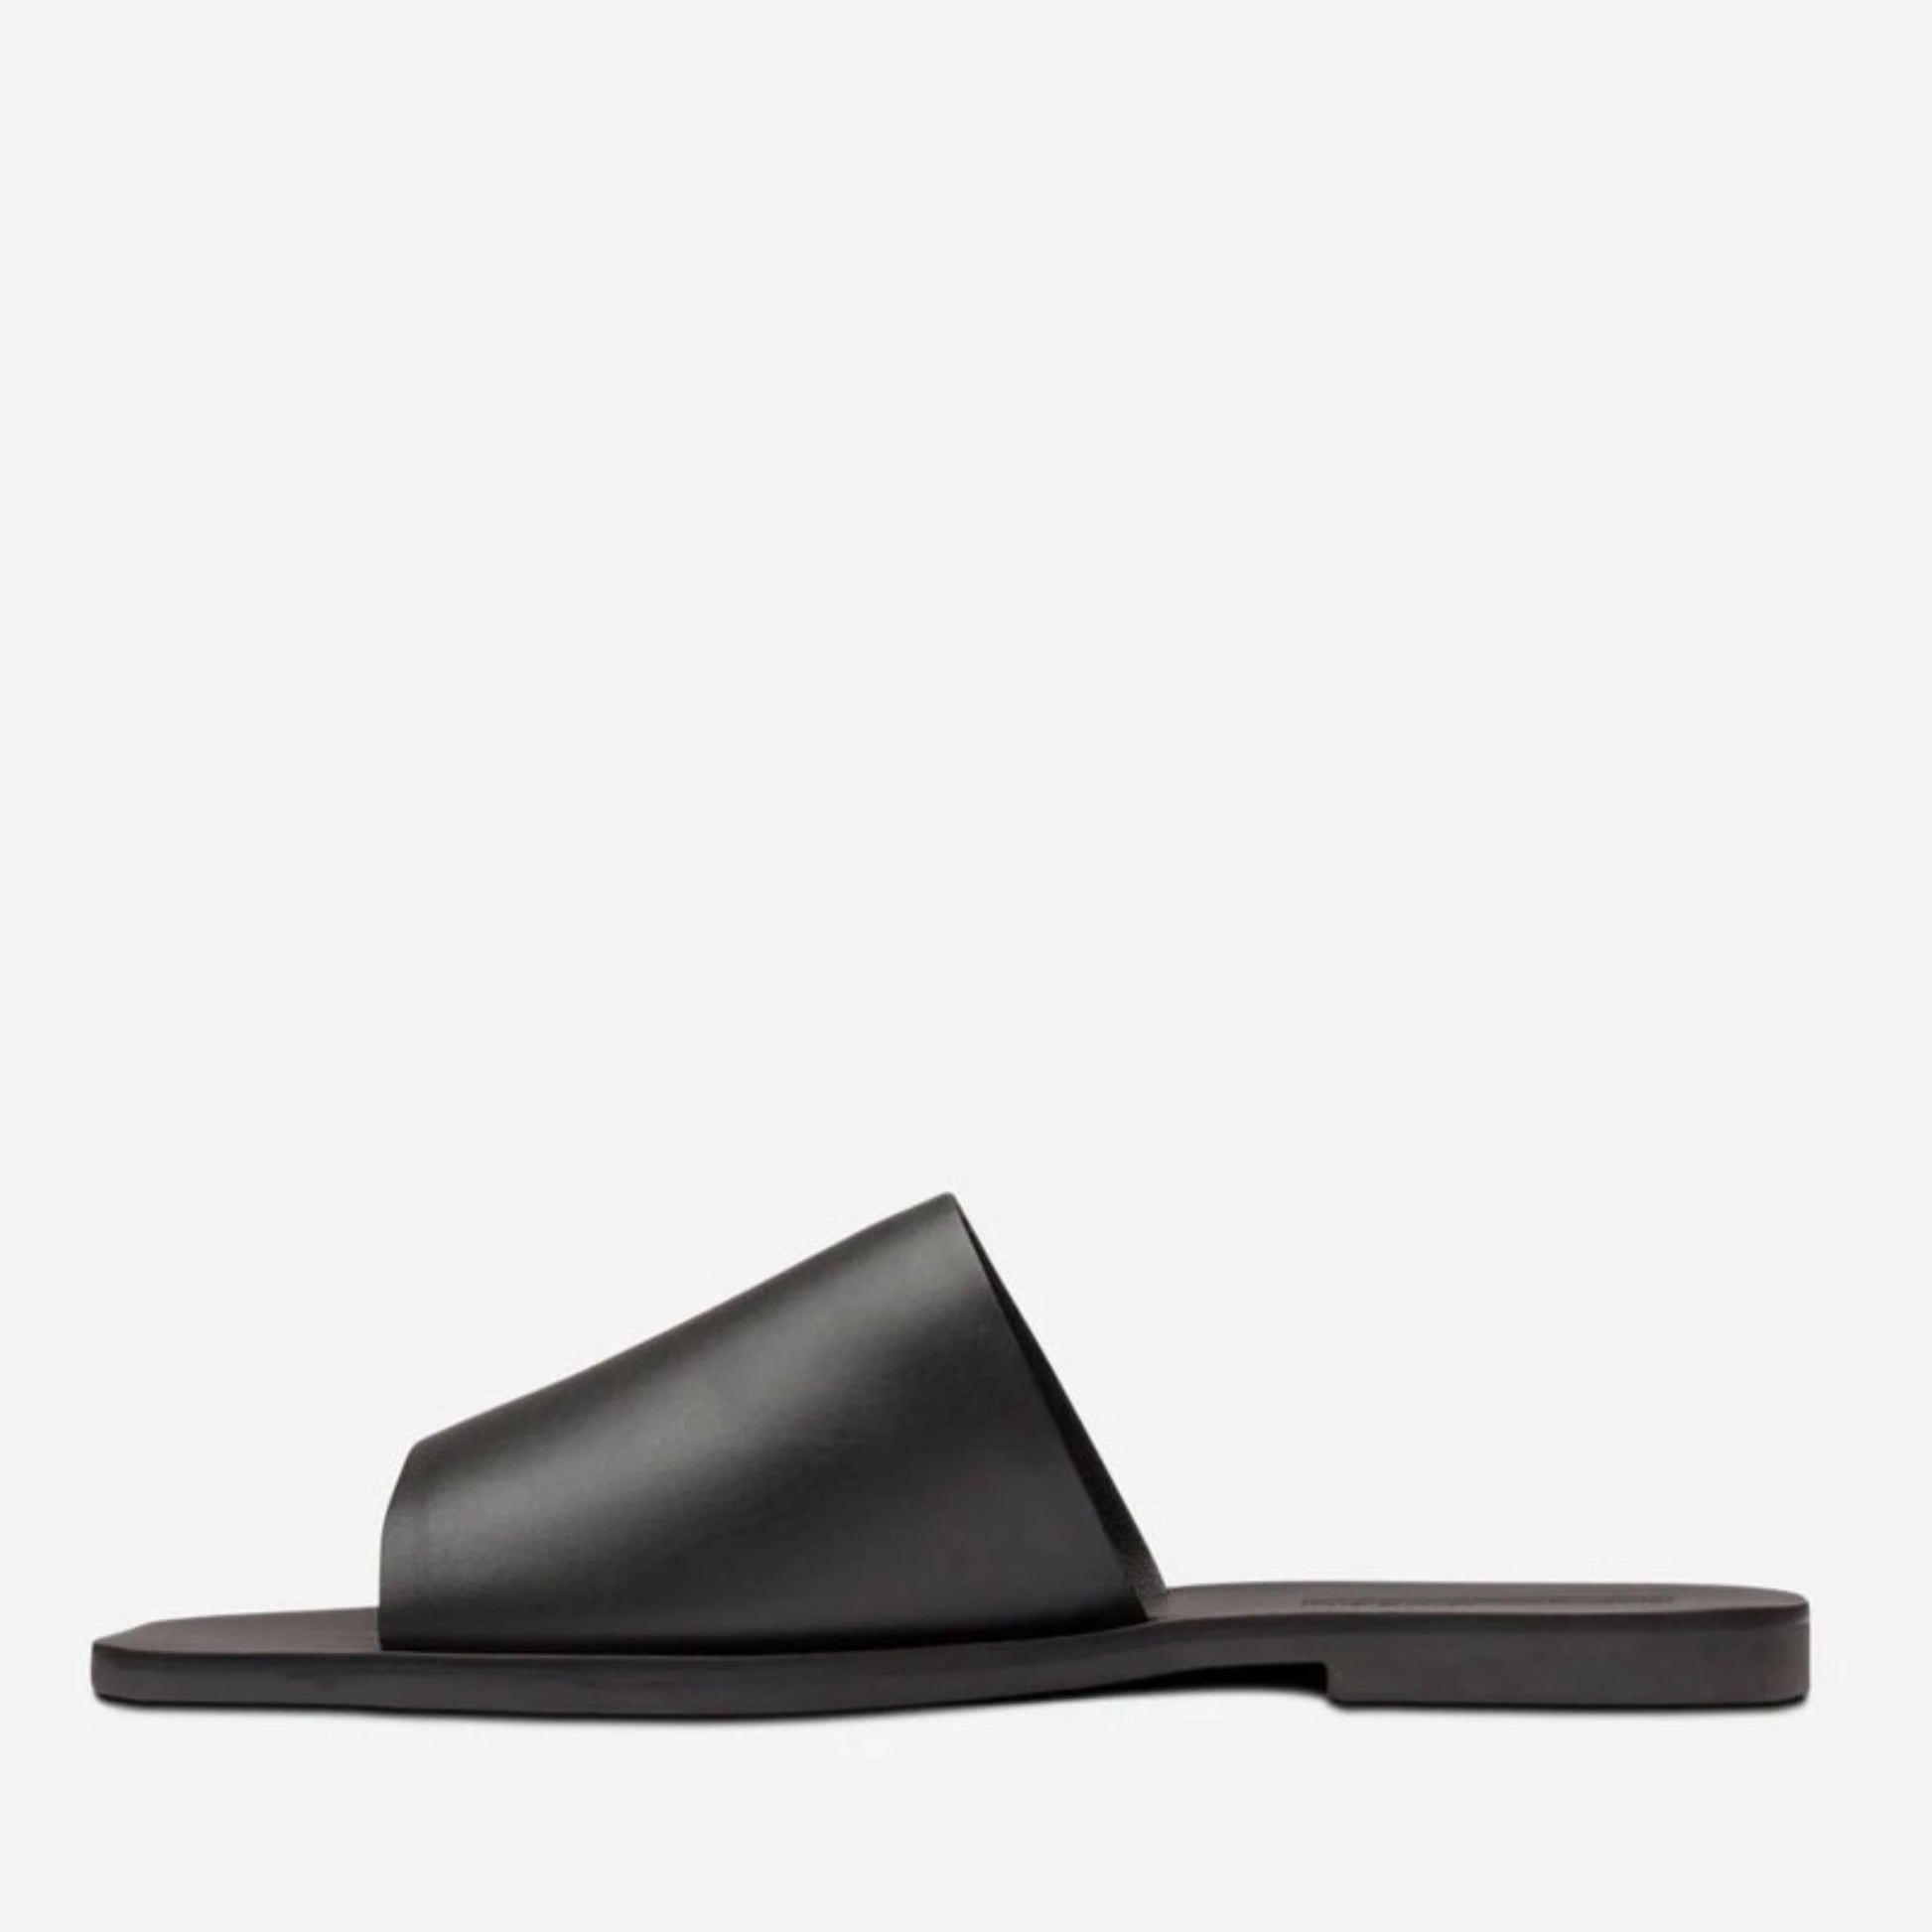 The everyday open-toe Mila slide gets a contemporary update with a new square sole. High quality matte leather provides a comfortable top strap and provides a high end finish to this minimalist shoe